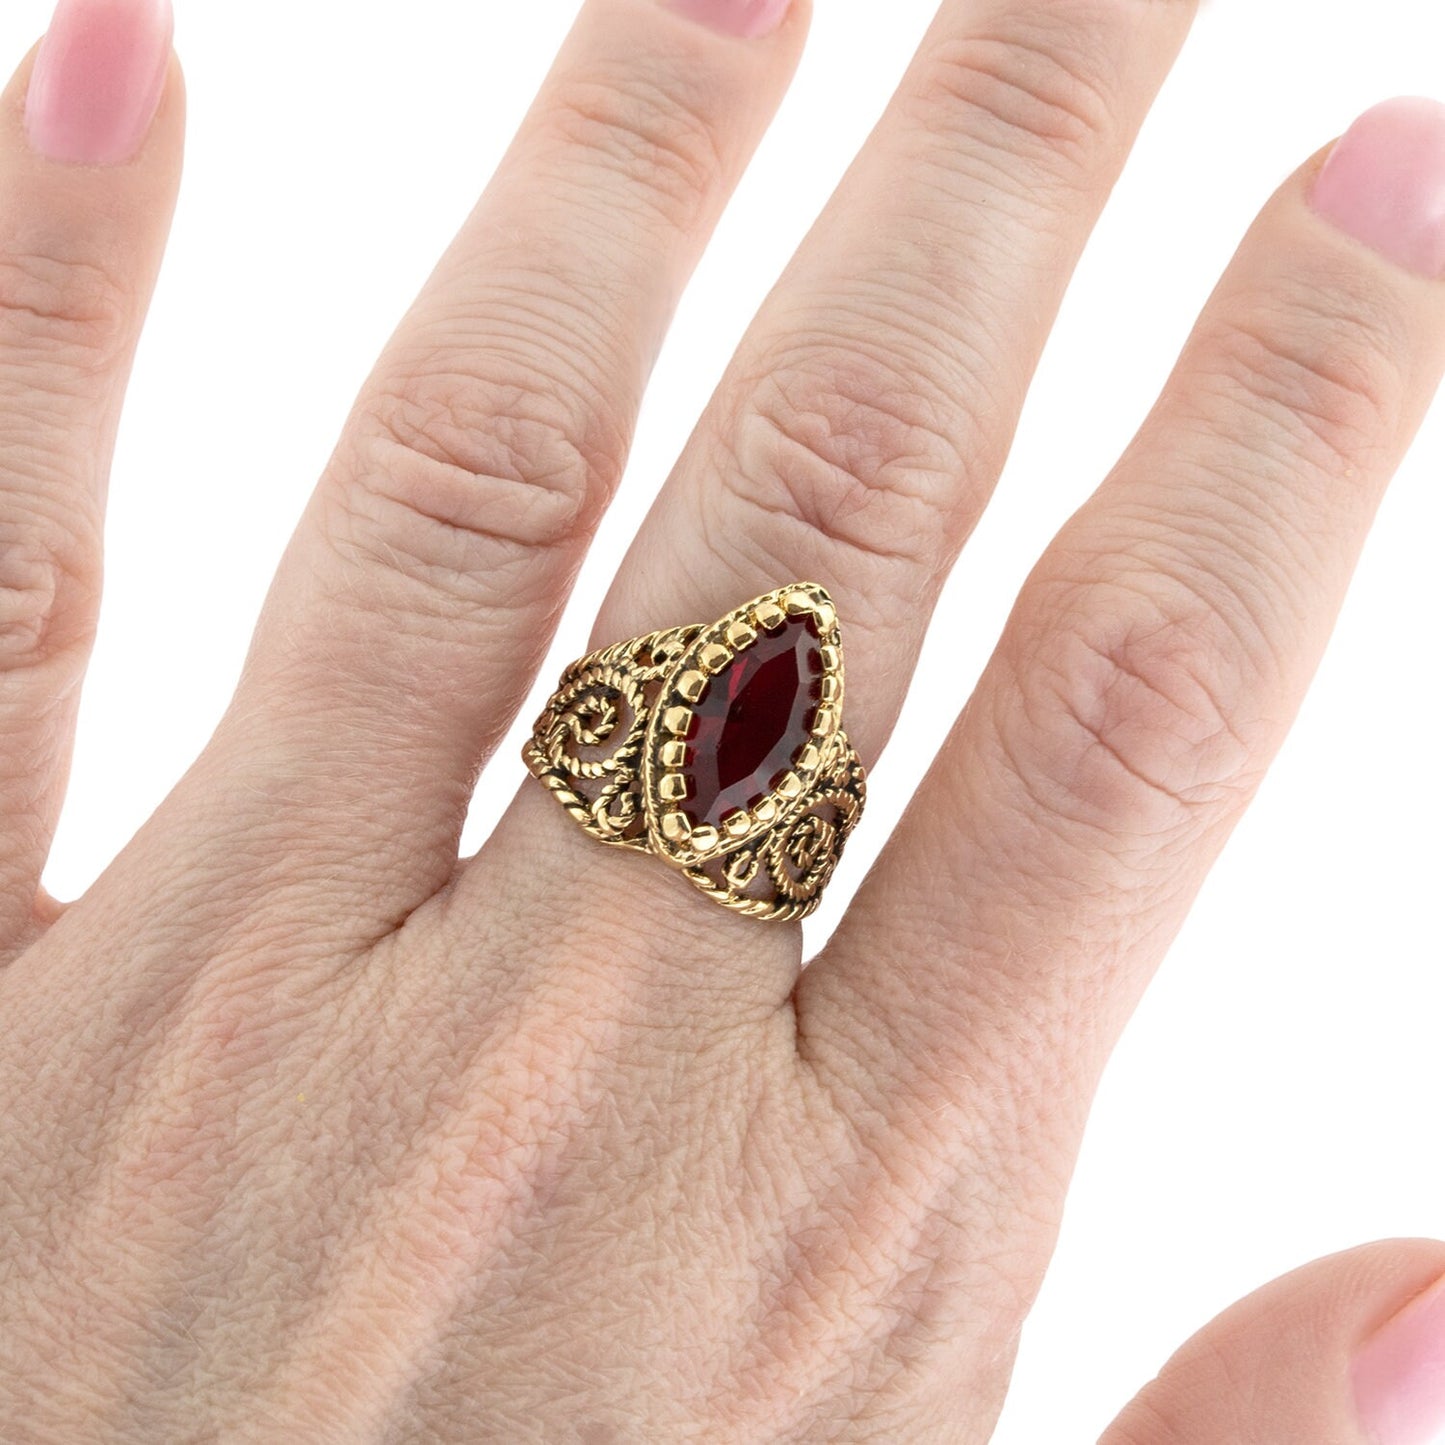 Vintage Ring Austrian Crystal Antique 18k Gold Filigree Edwardian Style Womans Victorian Jewelry R1444